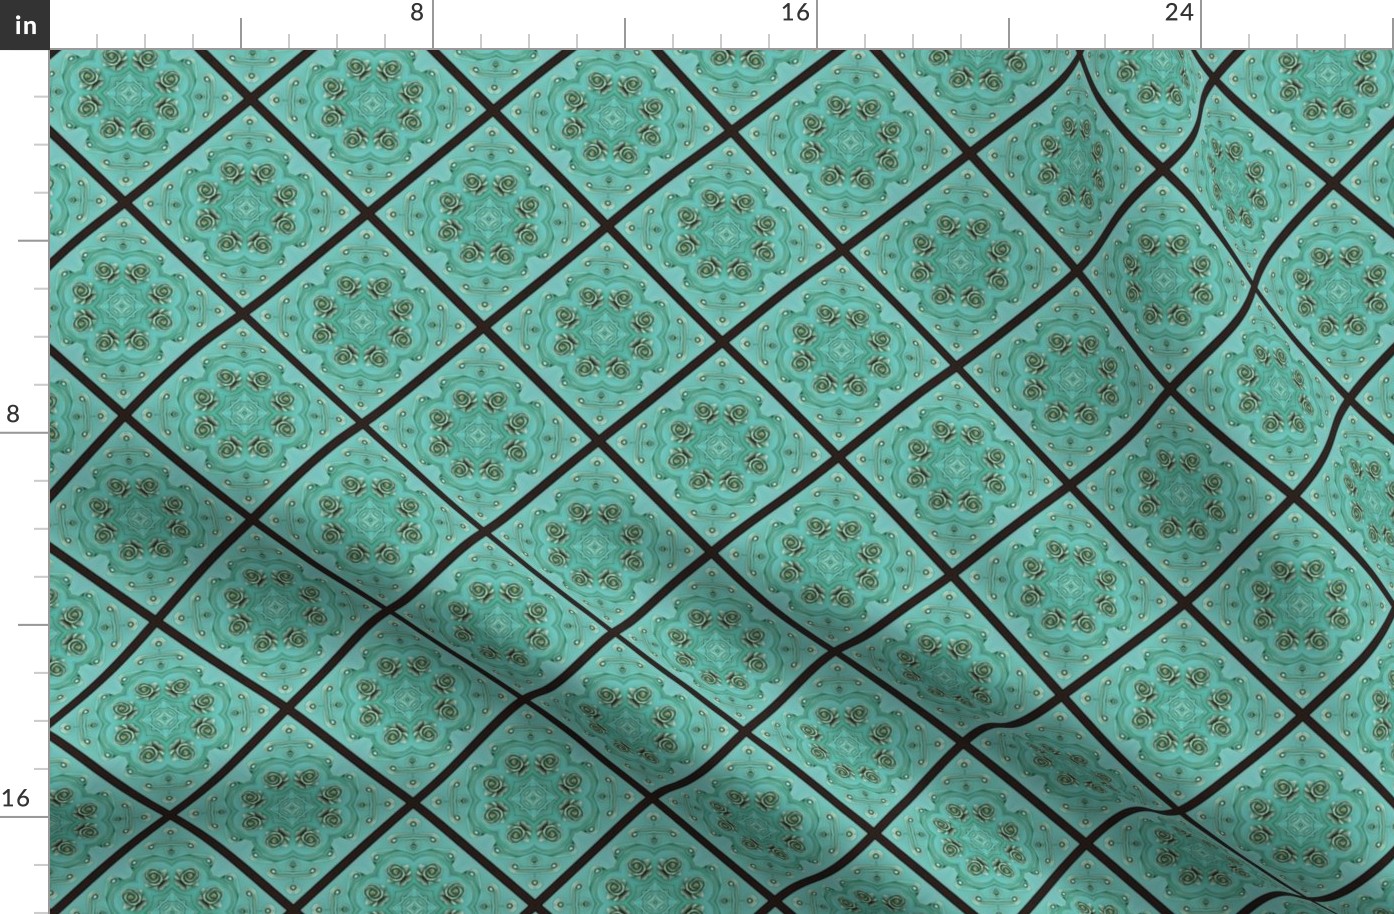 Carved Jade Rose Tiles Inlaid in Fabric | Spoonflower